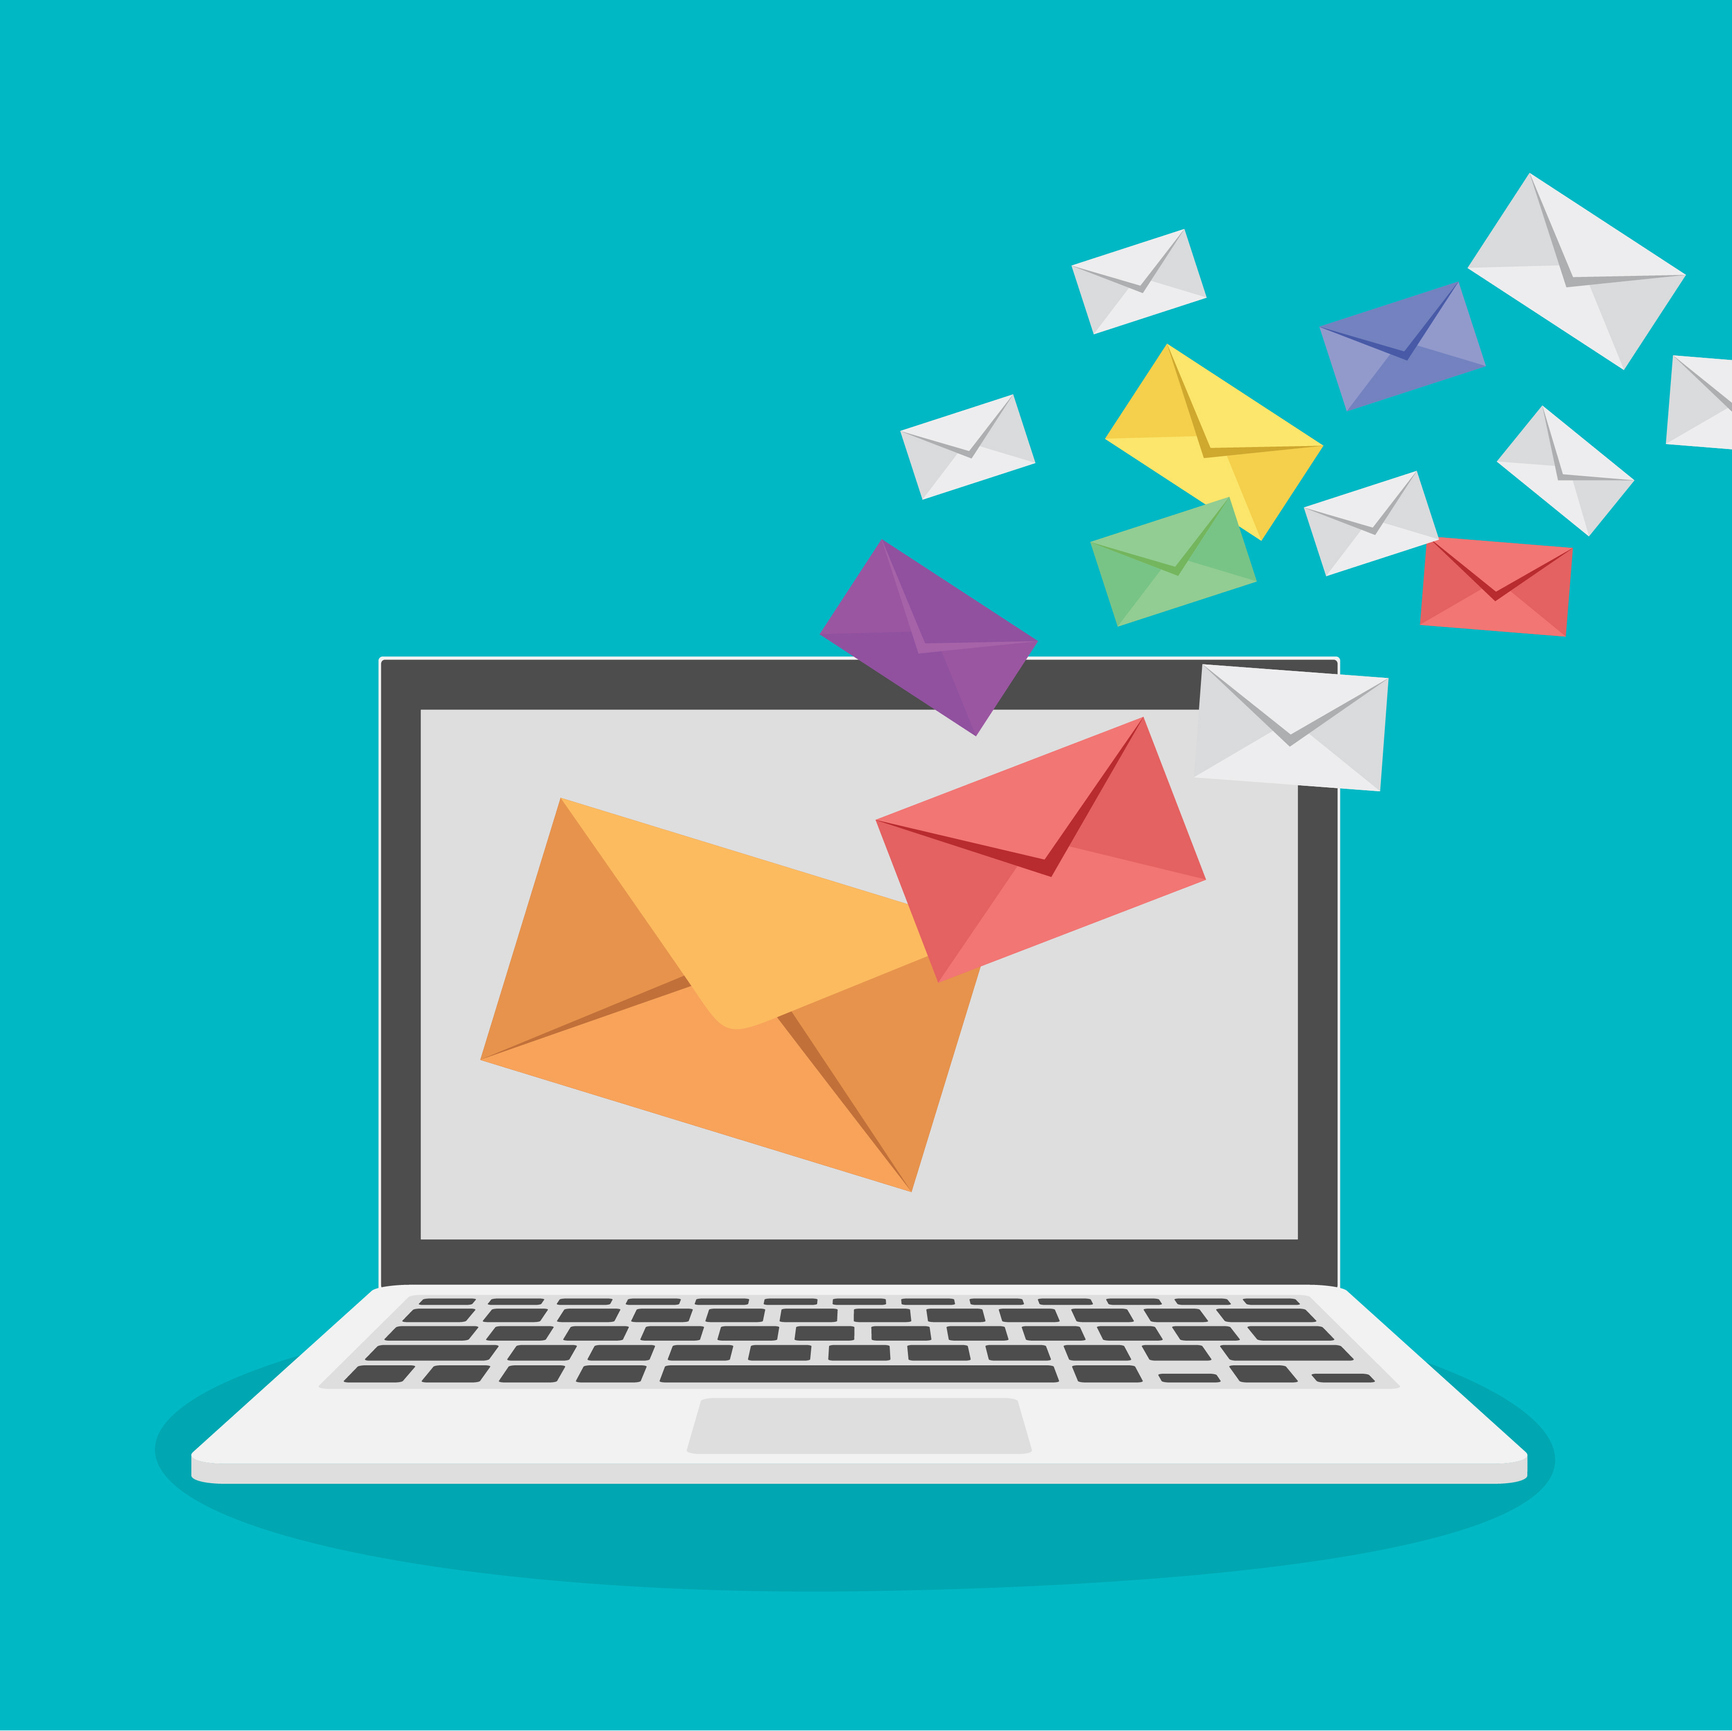 USING VIDEOS IN EMAIL MARKETING